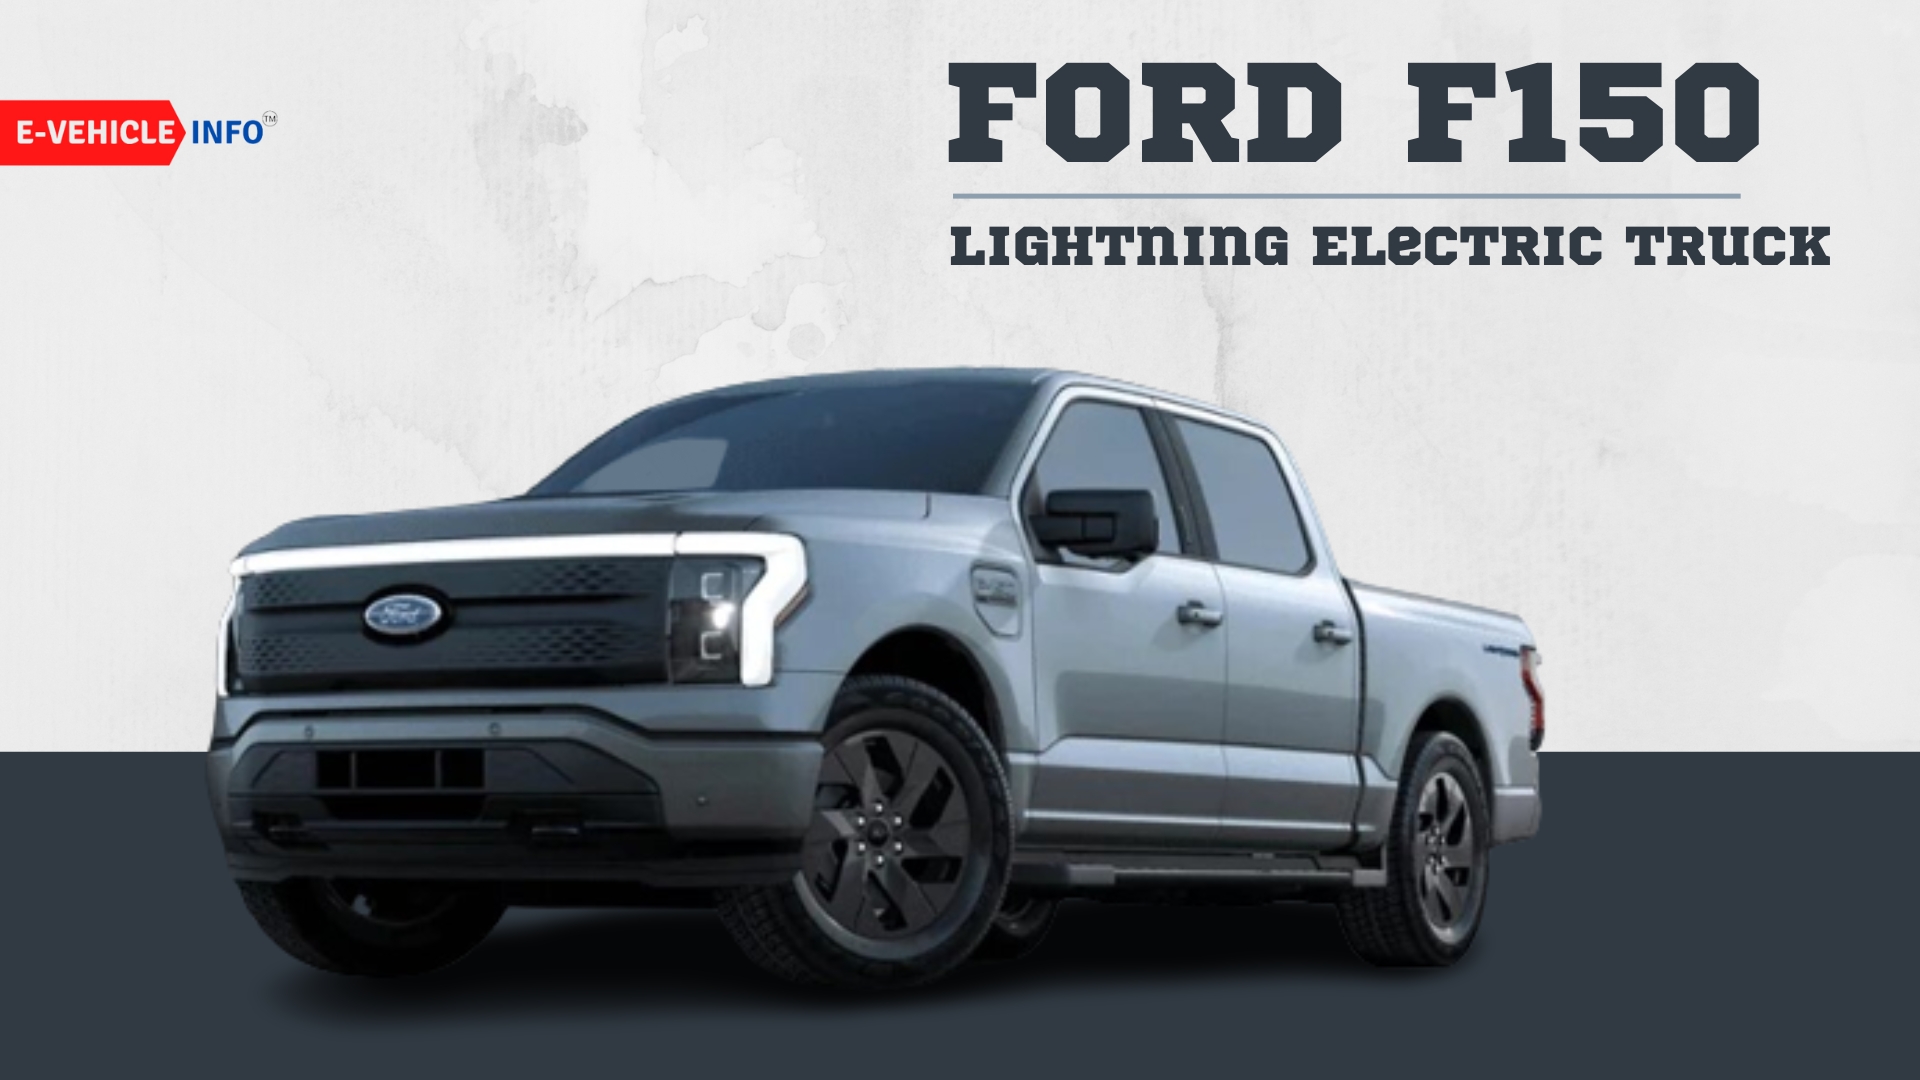 https://e-vehicleinfo.com/global/ford-f150-lightning-electric-pickup-truck-price-range-and-specification/